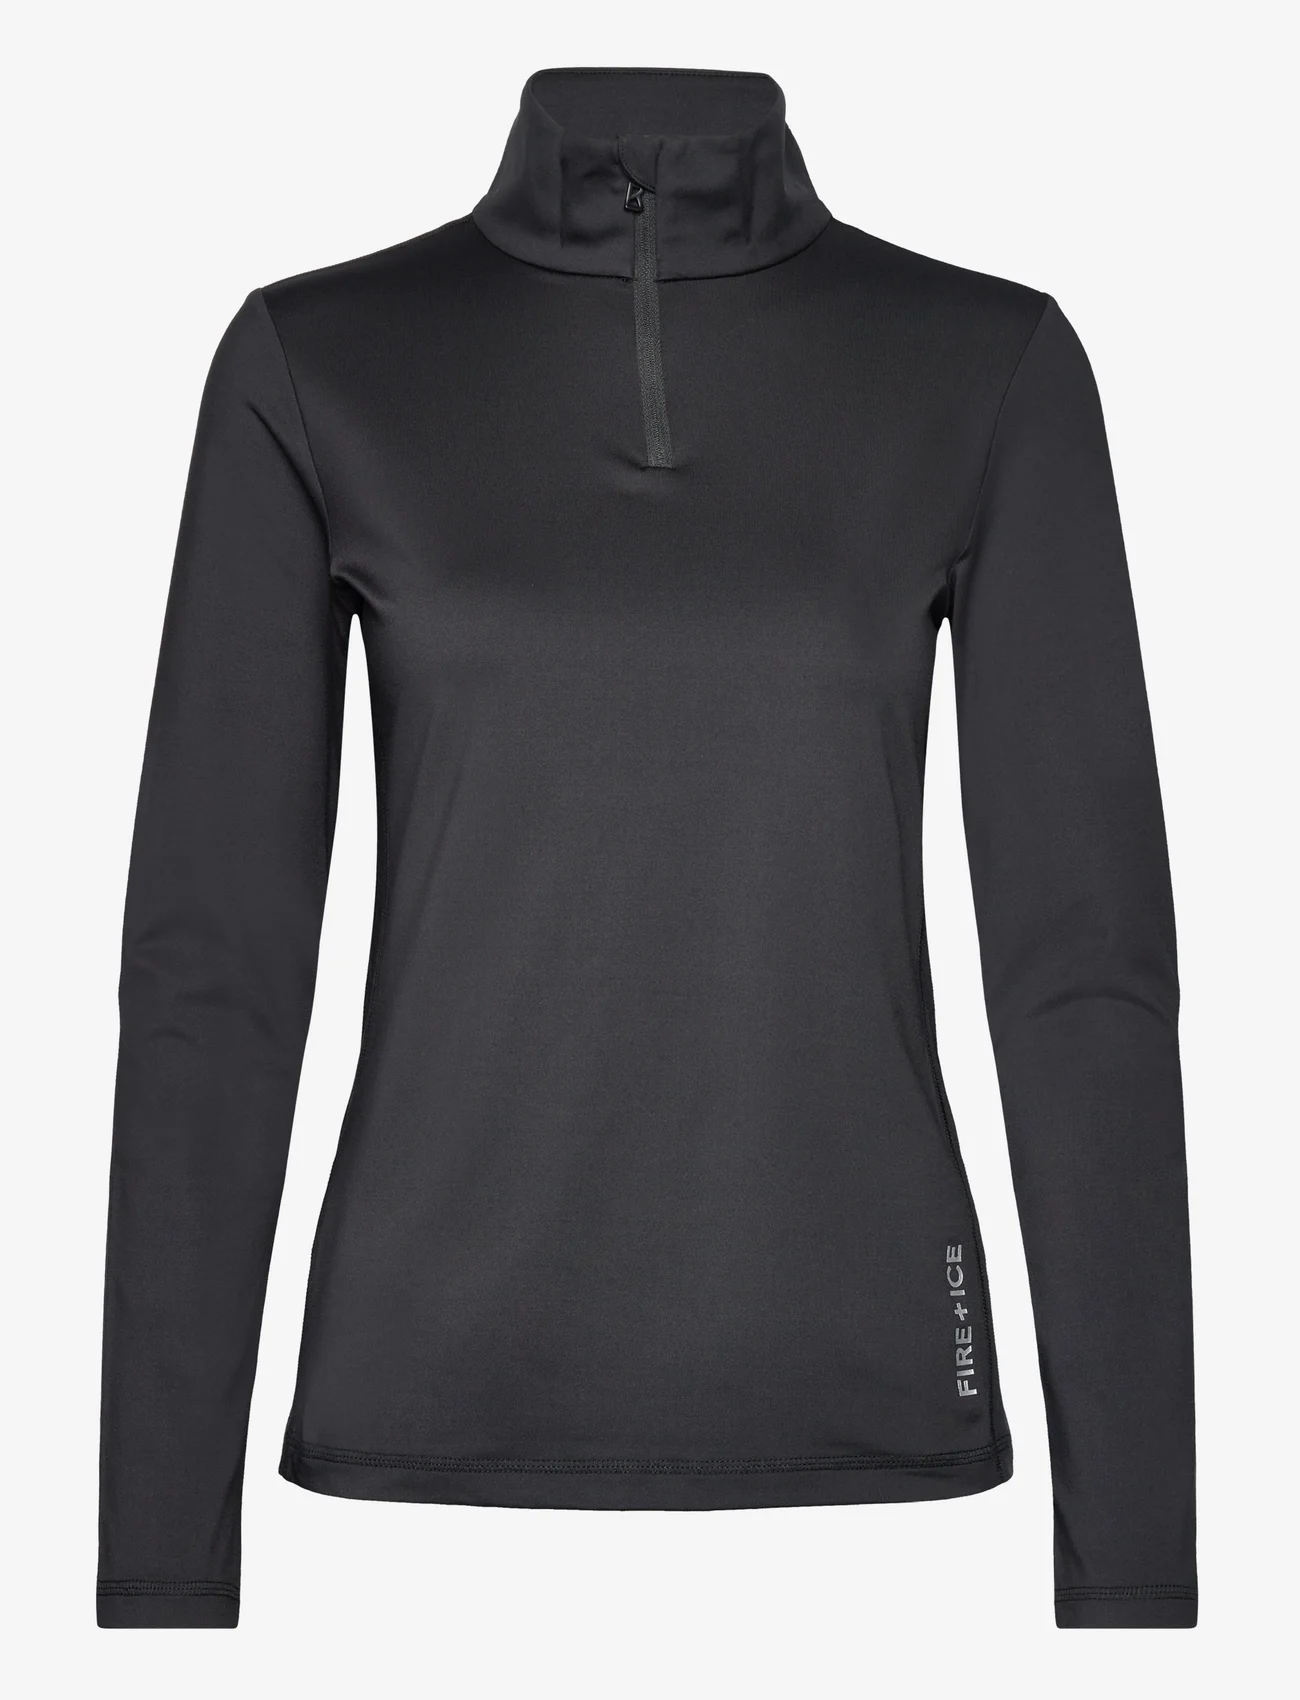 FIRE+ICE - MARGO2 - base layer tops - black - 0